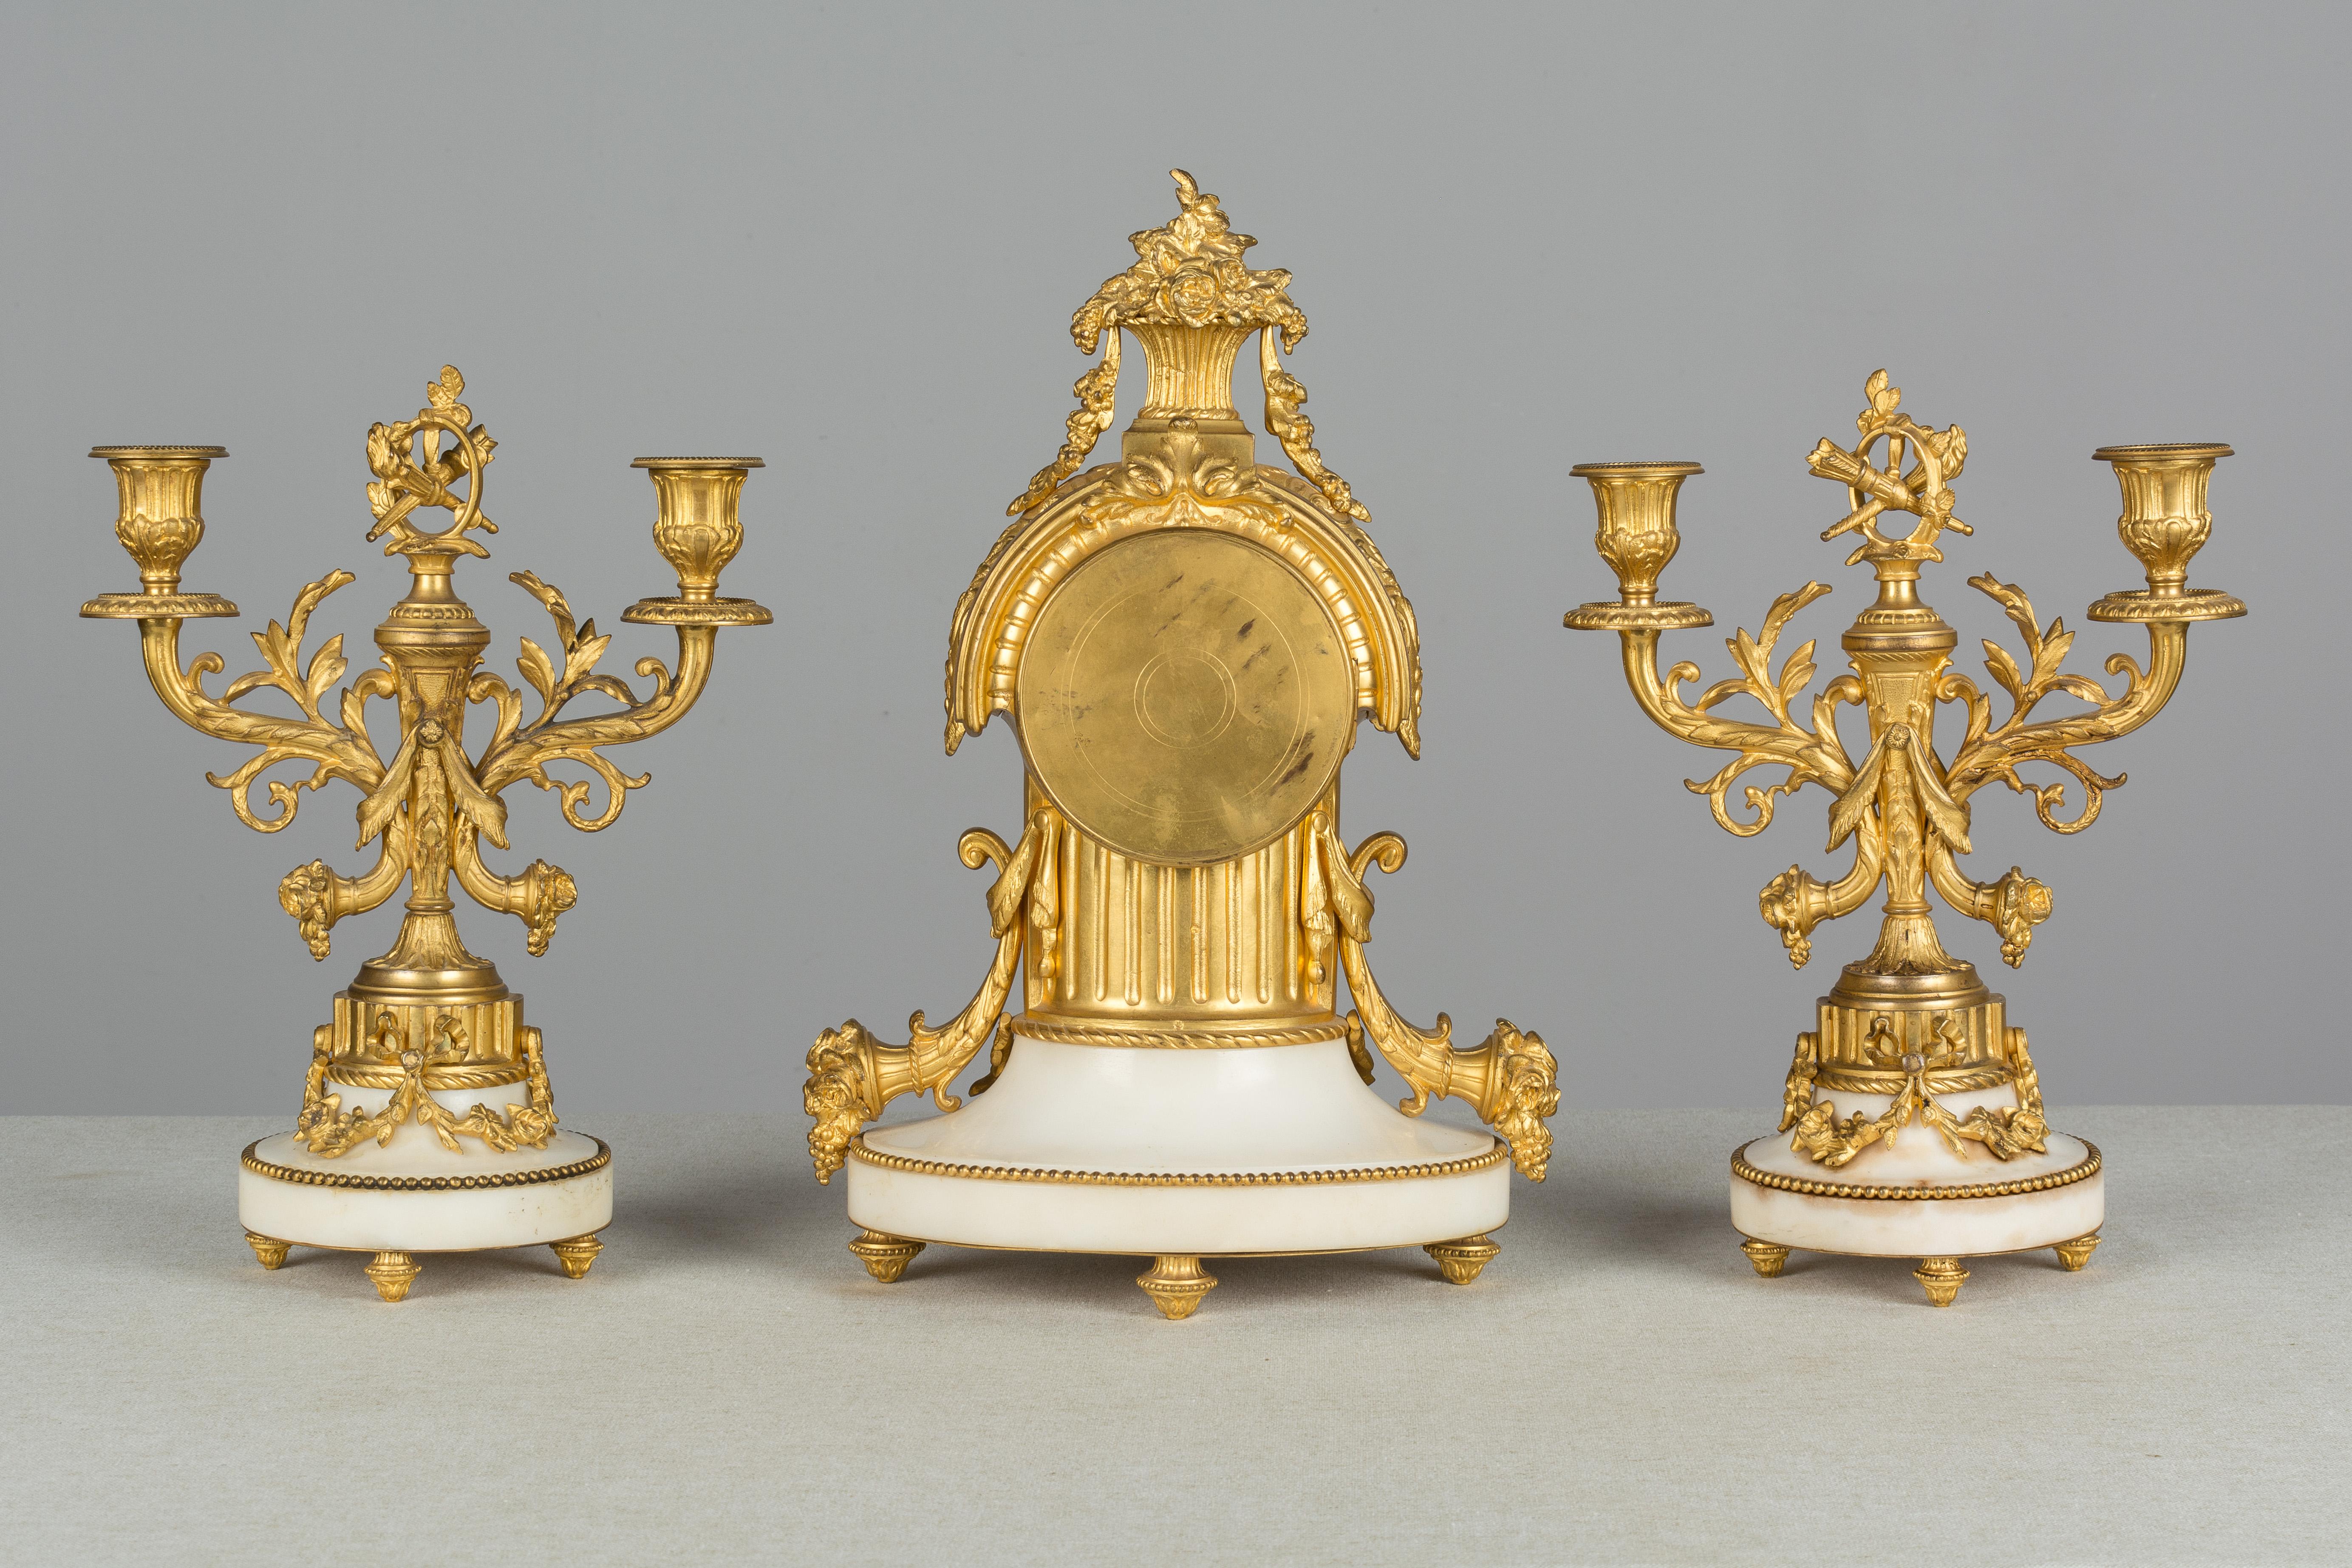 A beautiful 19th century Louis XVI style three-piece mantel garniture consisting of a clock and a pair of two-light candelabras. Bronze doré with Fine casting and bright gilt with white marble bases. Clock has an enamel face, hand-painted with Roman